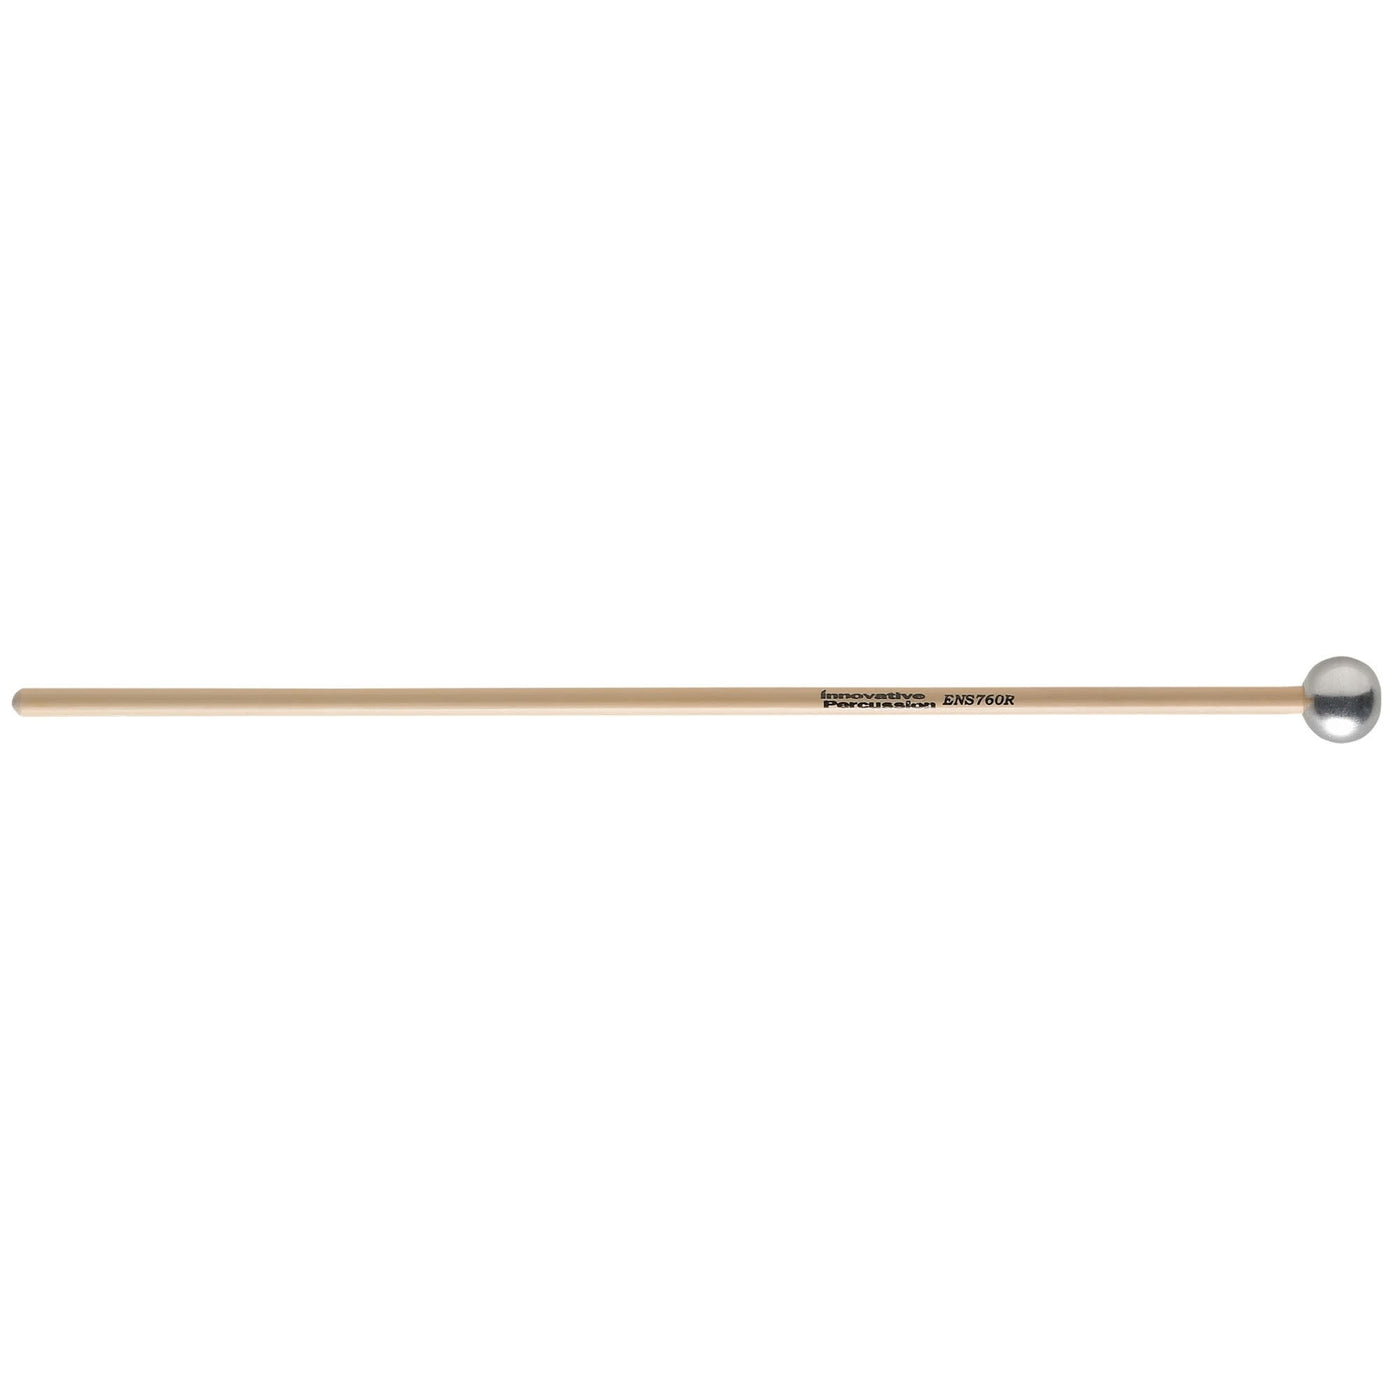 Innovative Percussion ENS760R Keyboard Mallet